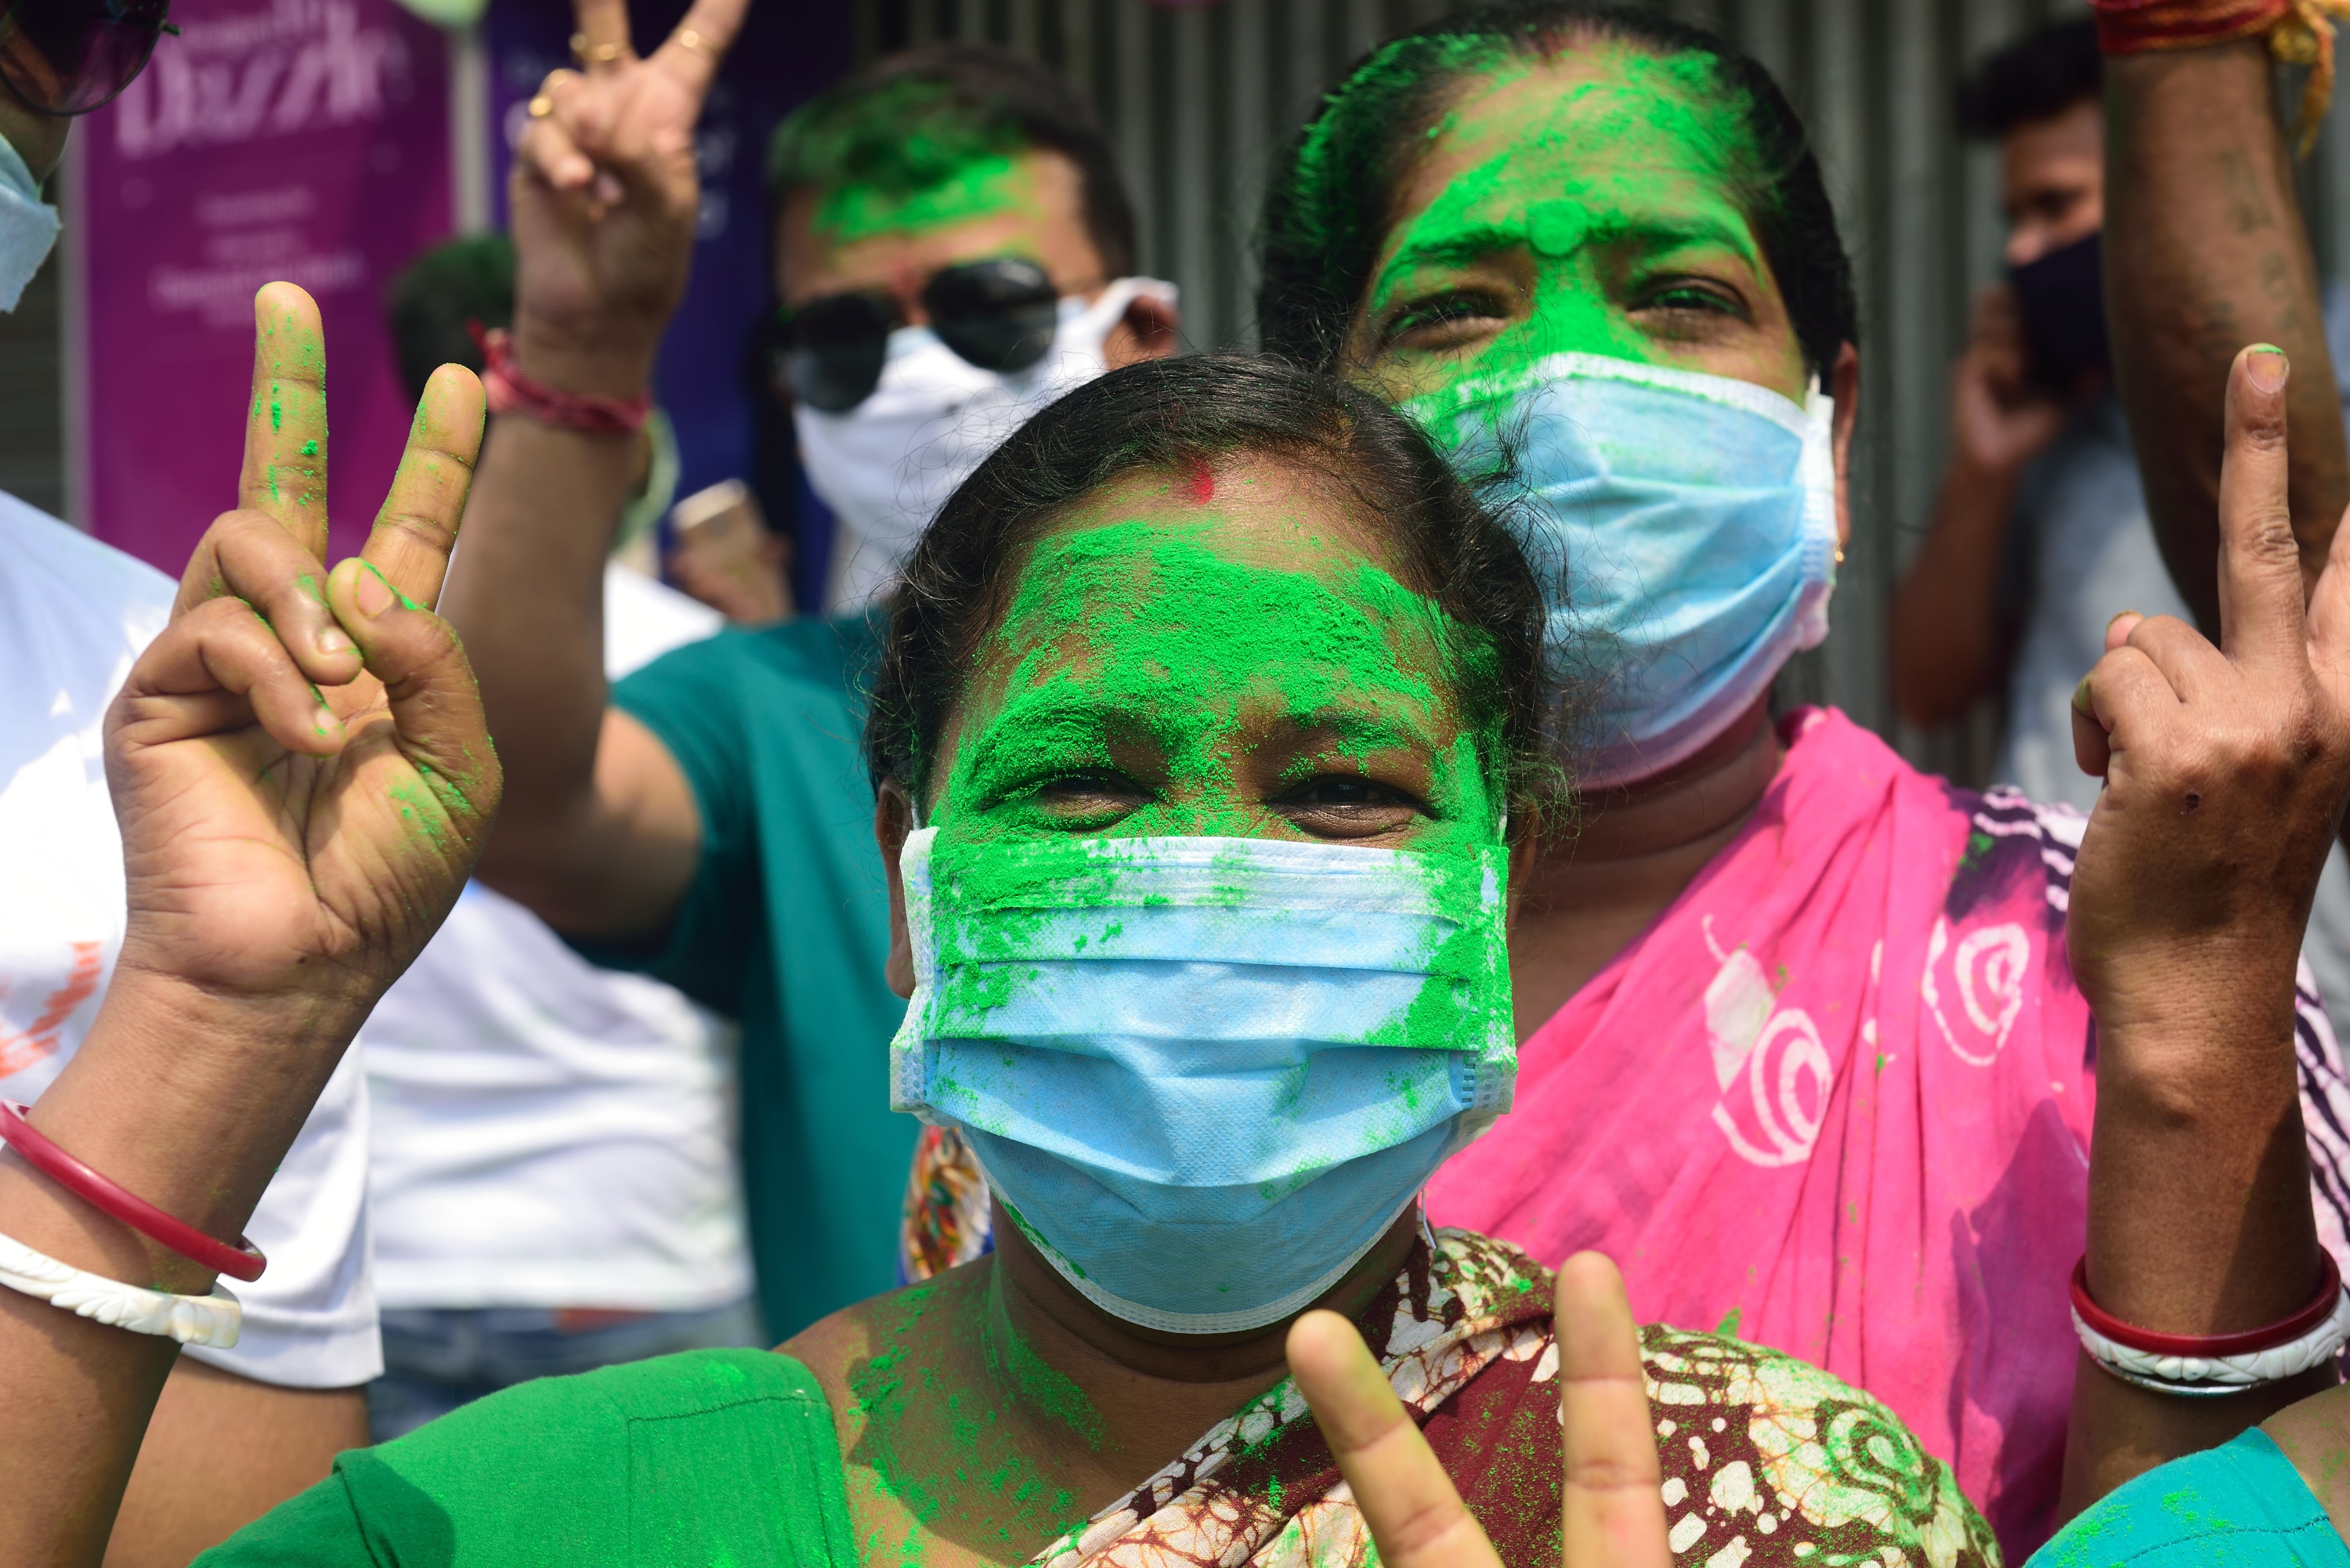 A Trinamul Congress supporter wearing a mask makes a victory sign to celebrate TMC's victory in the West Bengal Election, 2 May, 2021.